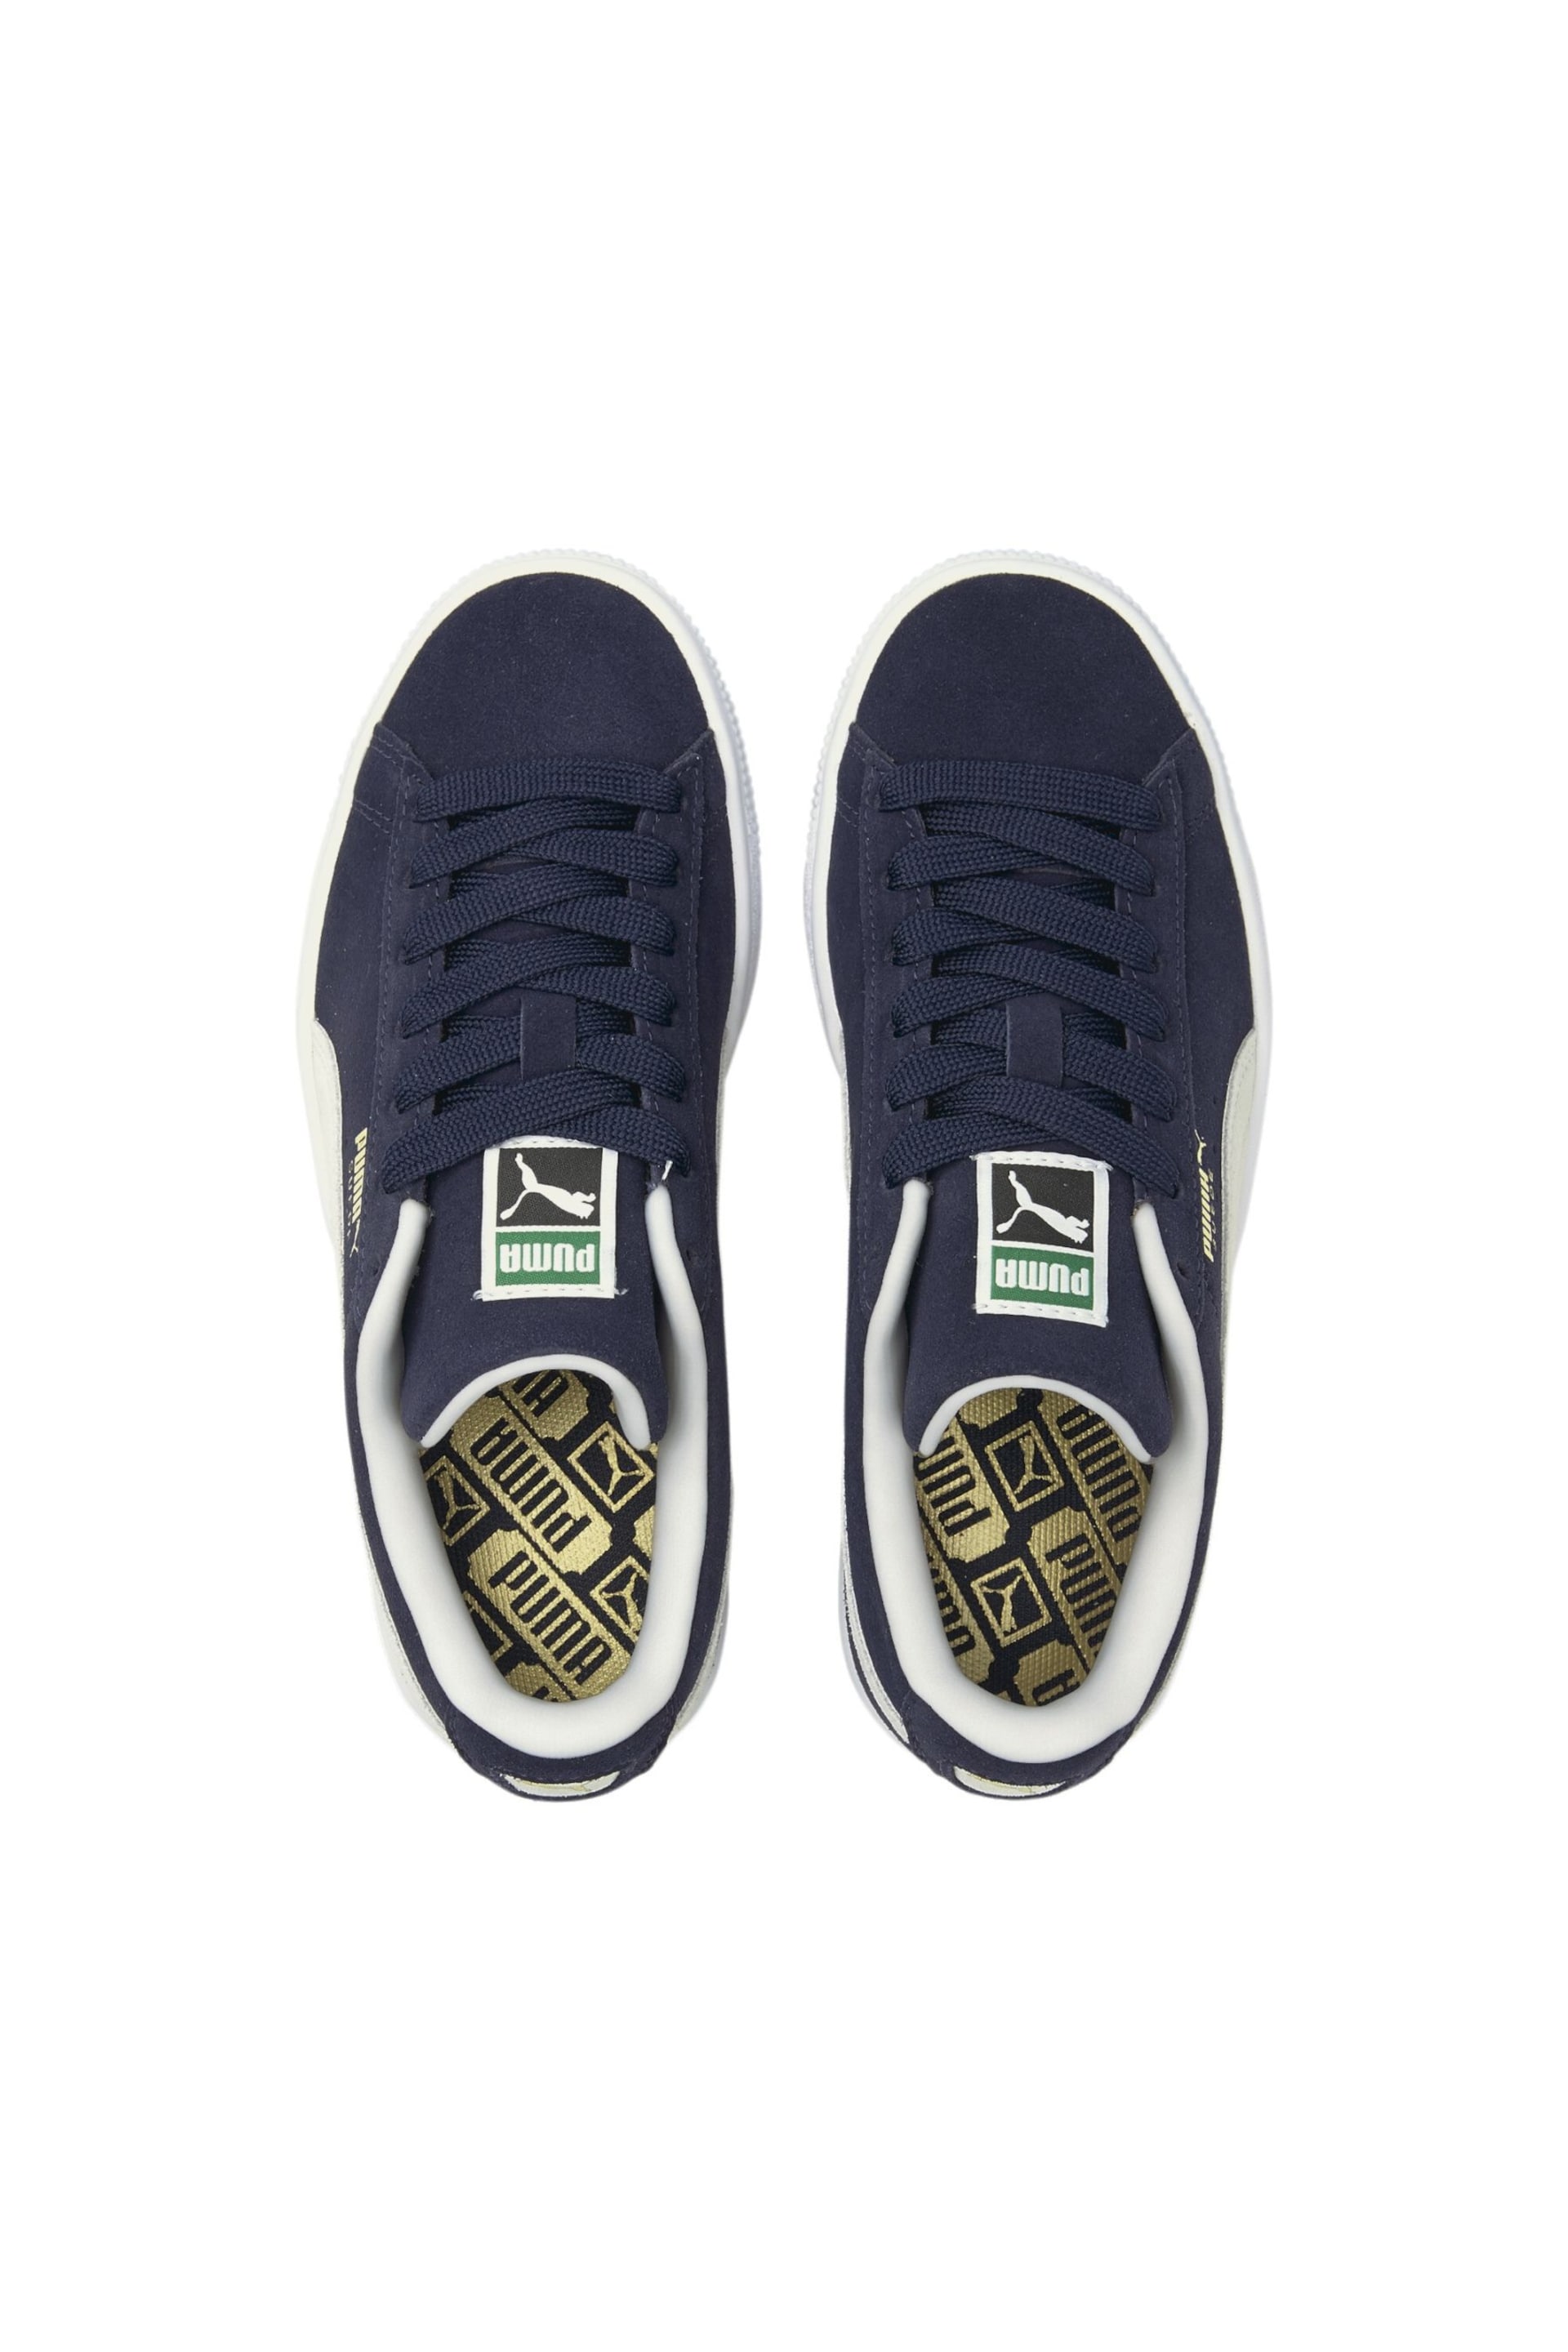 Puma Blue Suede Classic XXI Youth Trainers - Image 4 of 6